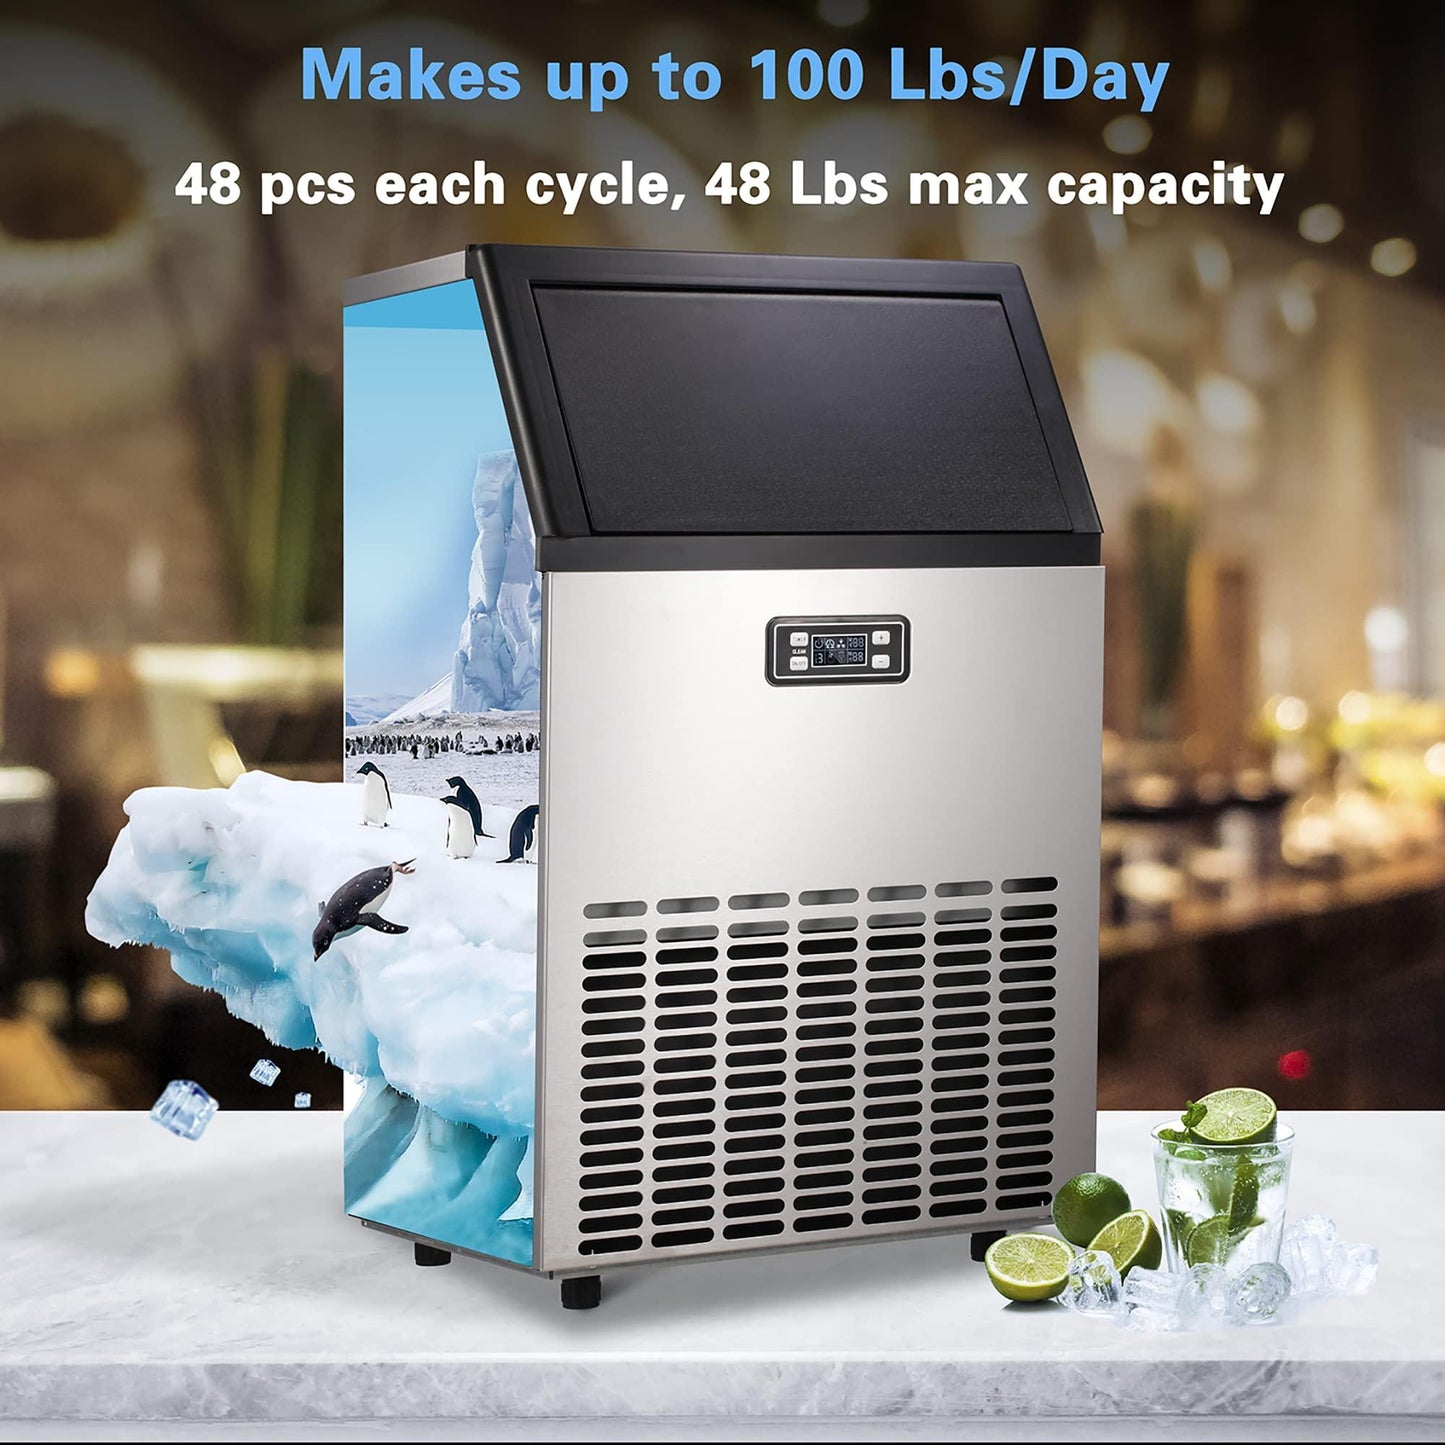 Electactic Ice Maker, Commercial Ice Machine,100Lbs/Day, Stainless Steel Ice Machine with 48 Lbs Capacity, Ideal for Restaurant, Bars, Home and Offices, Includes Scoop - CookCave